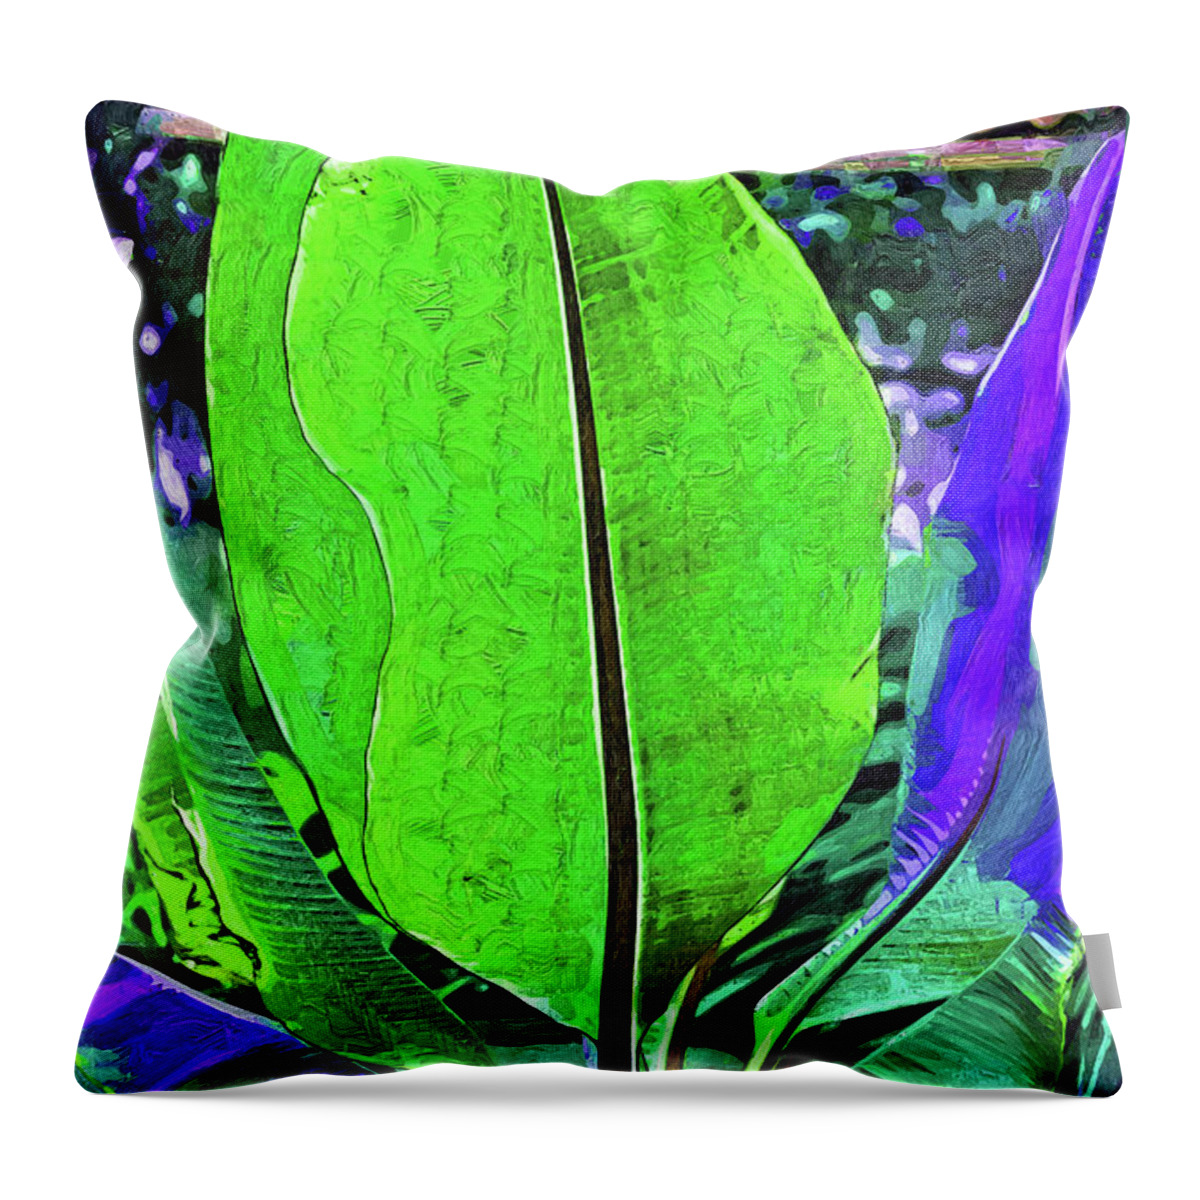 Banana-plant Throw Pillow featuring the digital art Abstract Banana Plant by Kirt Tisdale